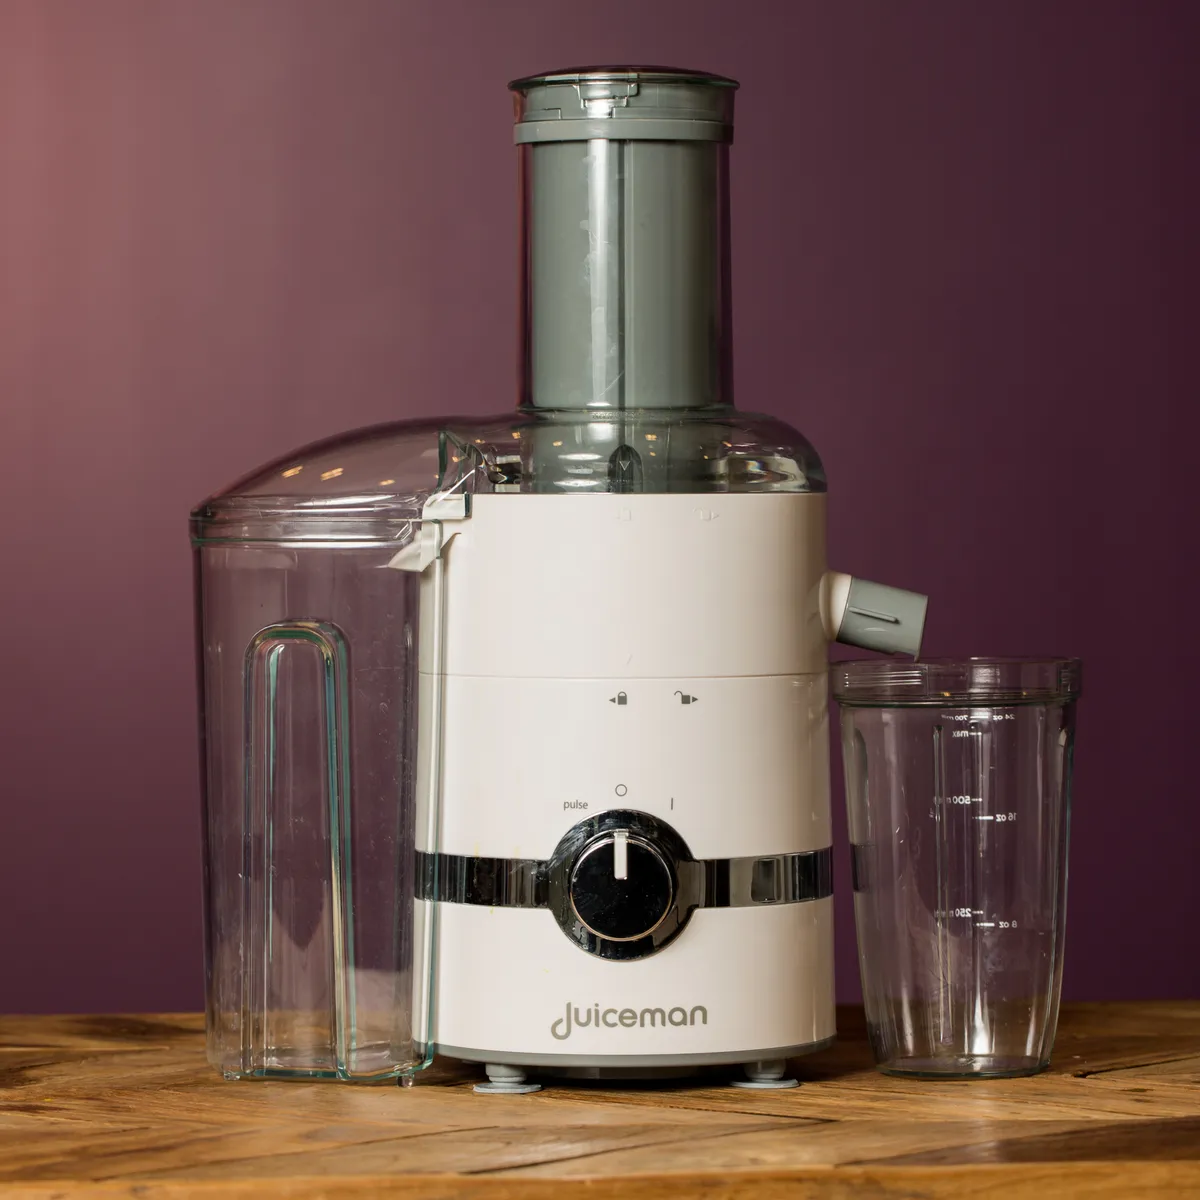 How to Clean a Juicer